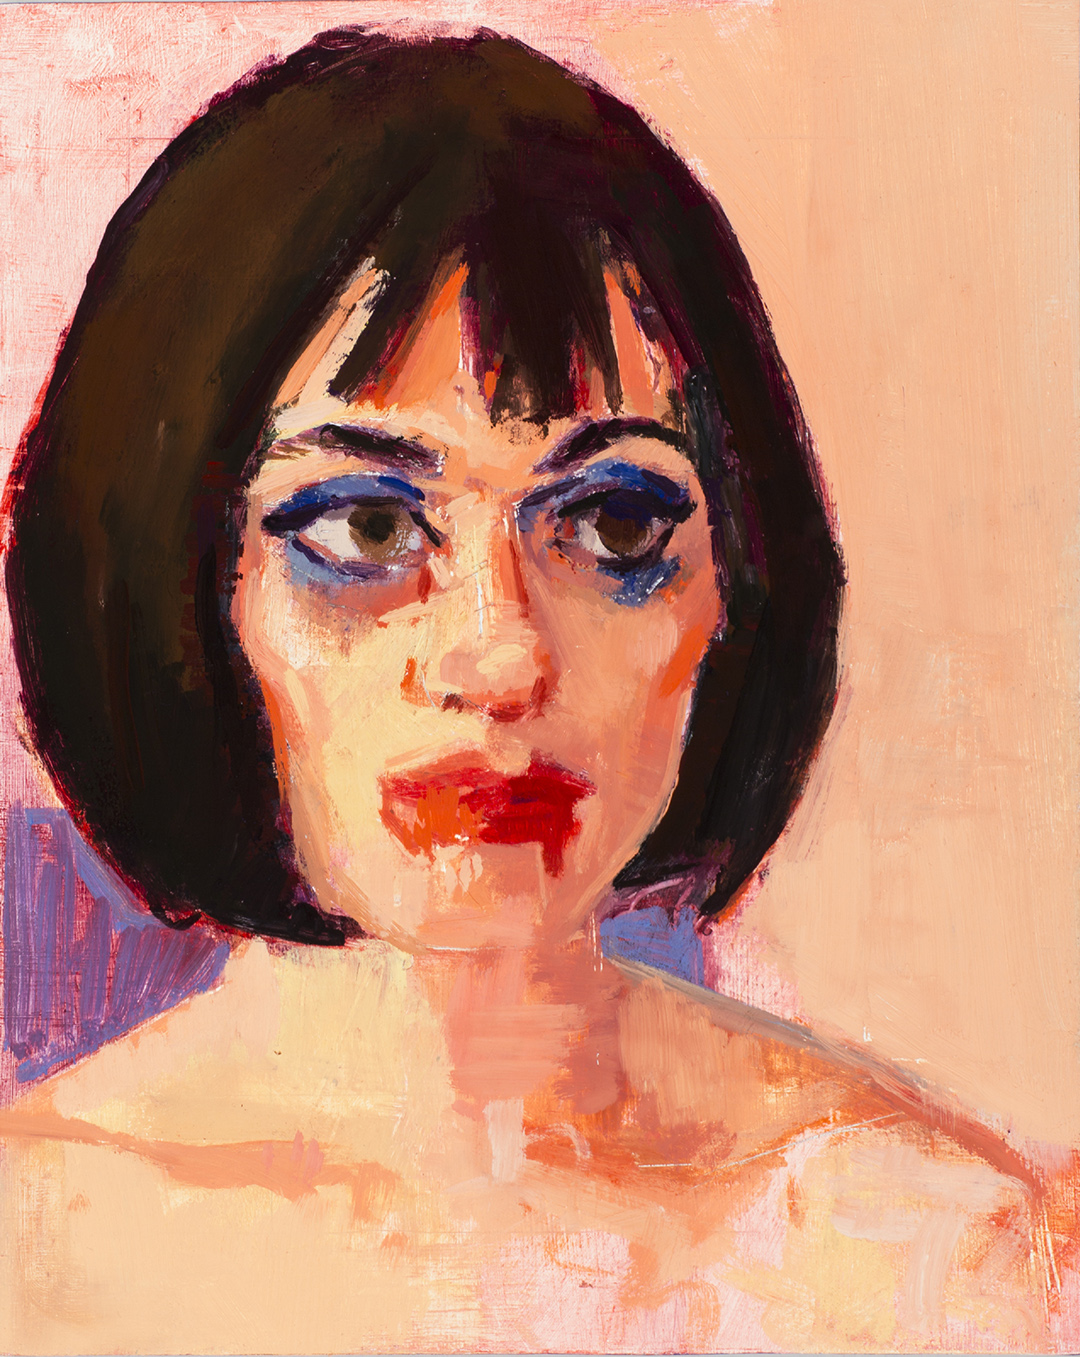 Painting of a figure's face and shoulders in three-quarter view. Painting created with broad brush strokes. Figure has brown chin-length hair, bright red lips, and brown eyes outlined by dark blue brush strokes.